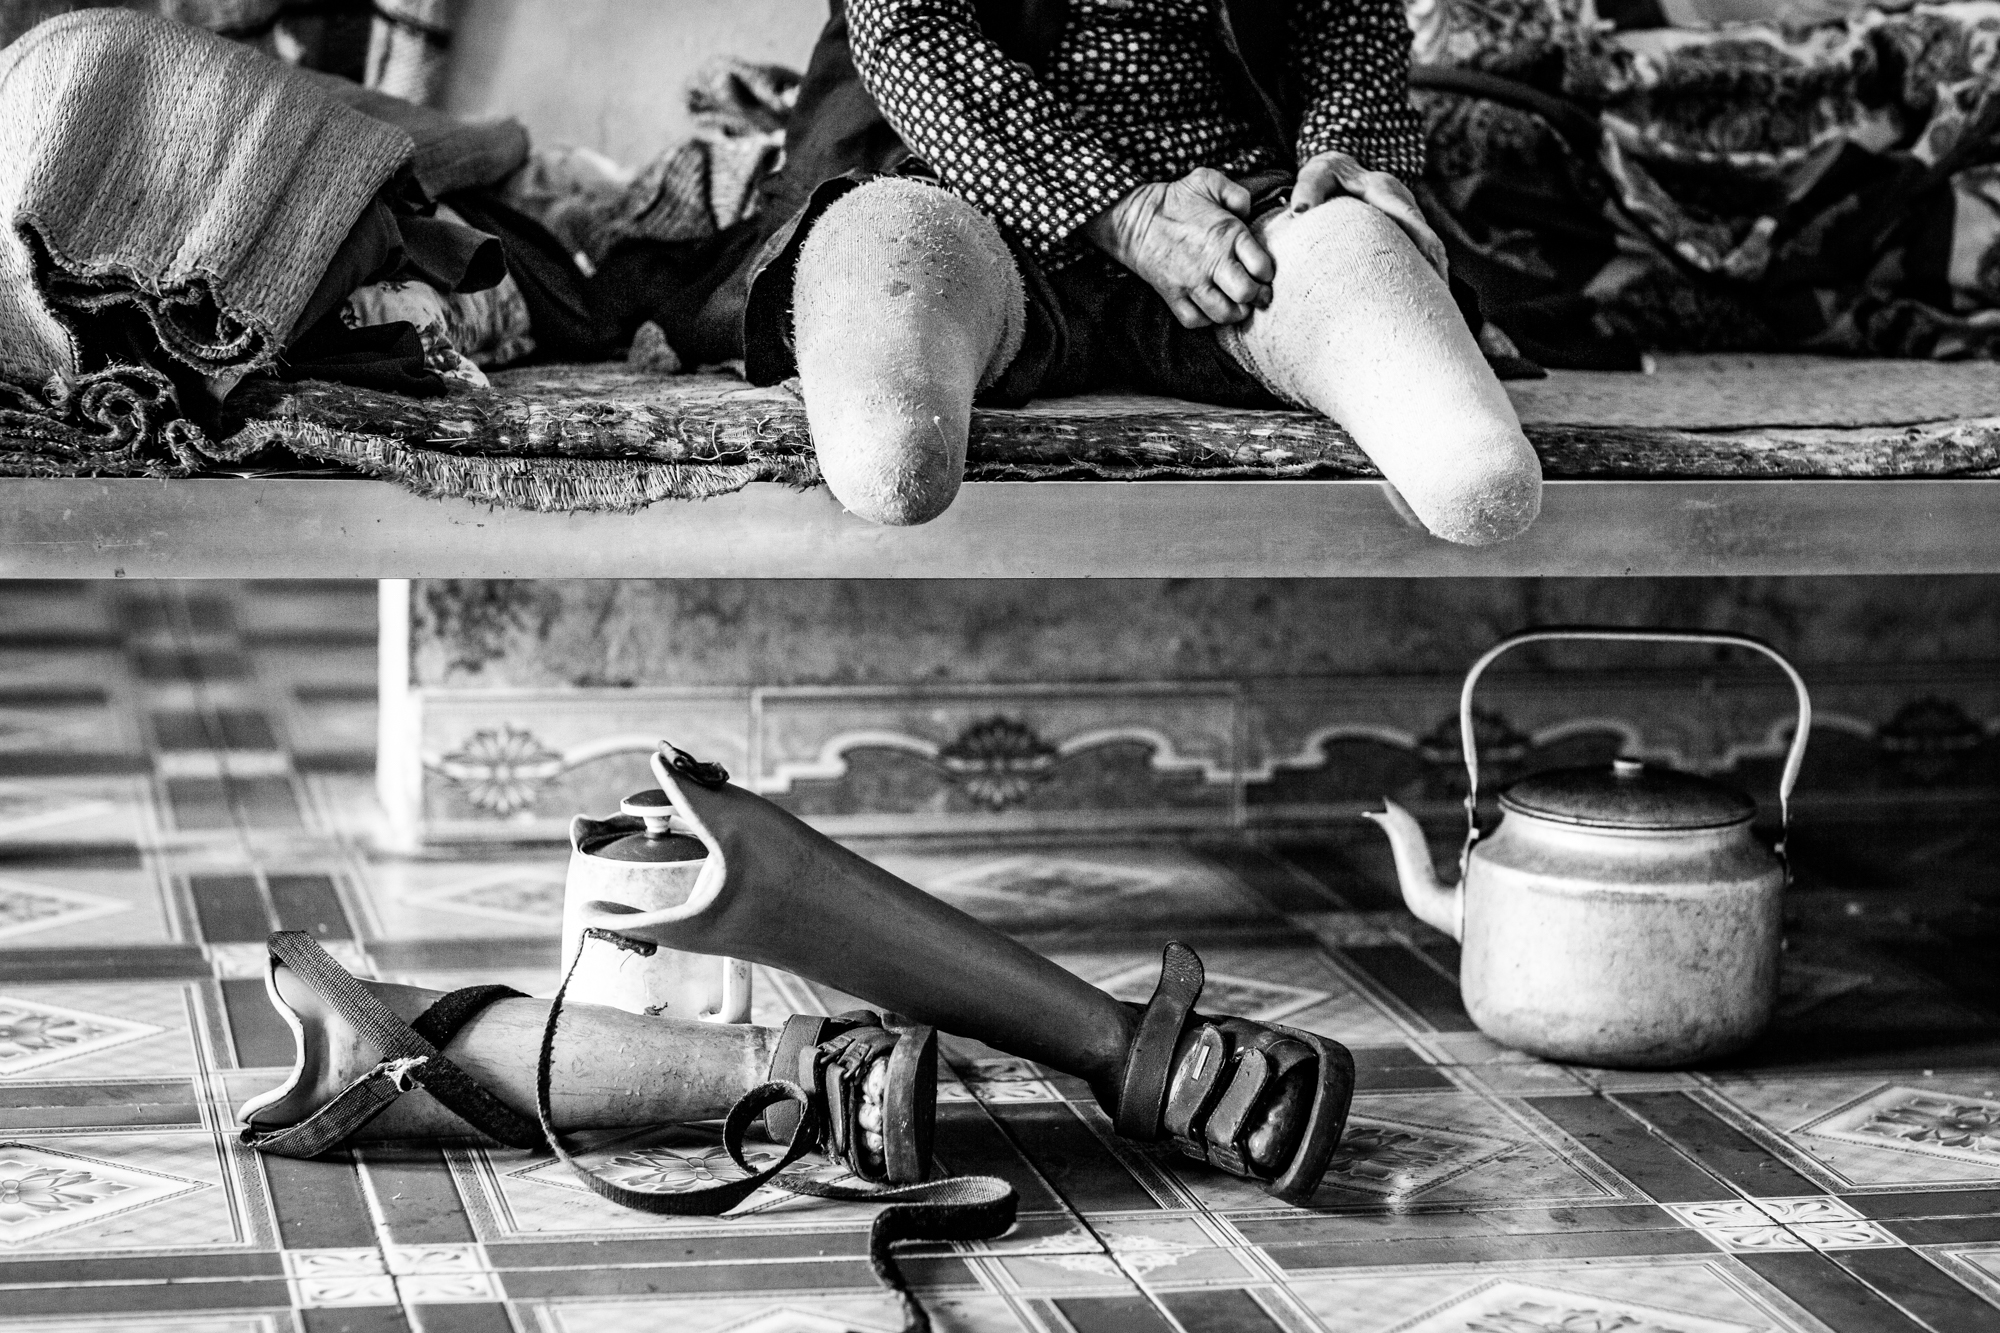 A woman prepares to attached her artificial legs lost to leprosy in a colony in northern Vietnam